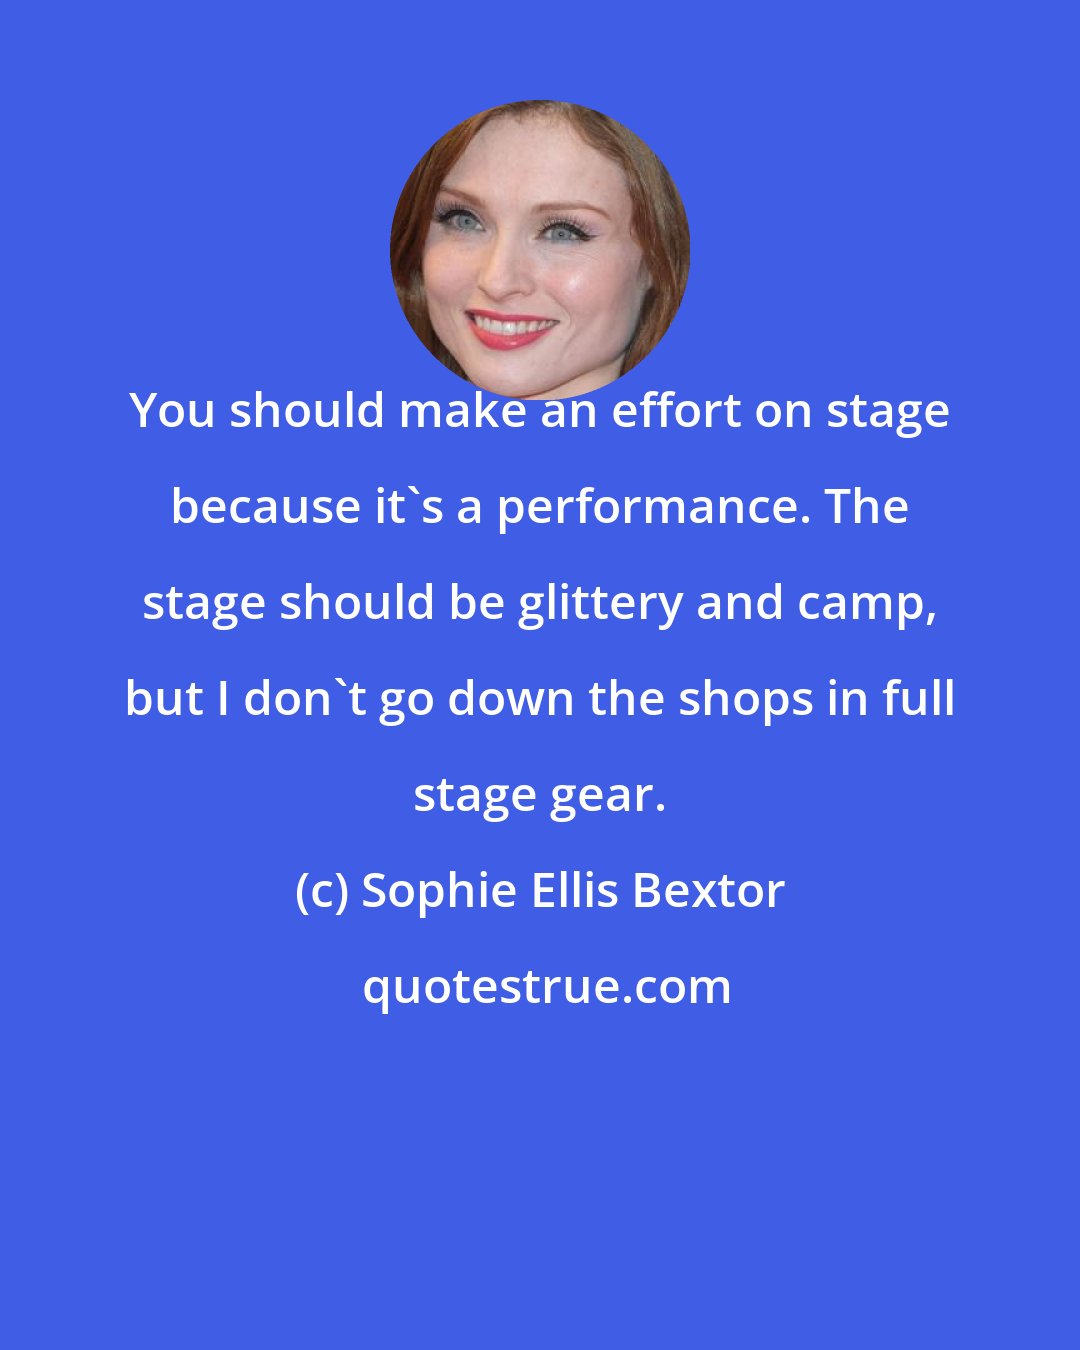 Sophie Ellis Bextor: You should make an effort on stage because it's a performance. The stage should be glittery and camp, but I don't go down the shops in full stage gear.